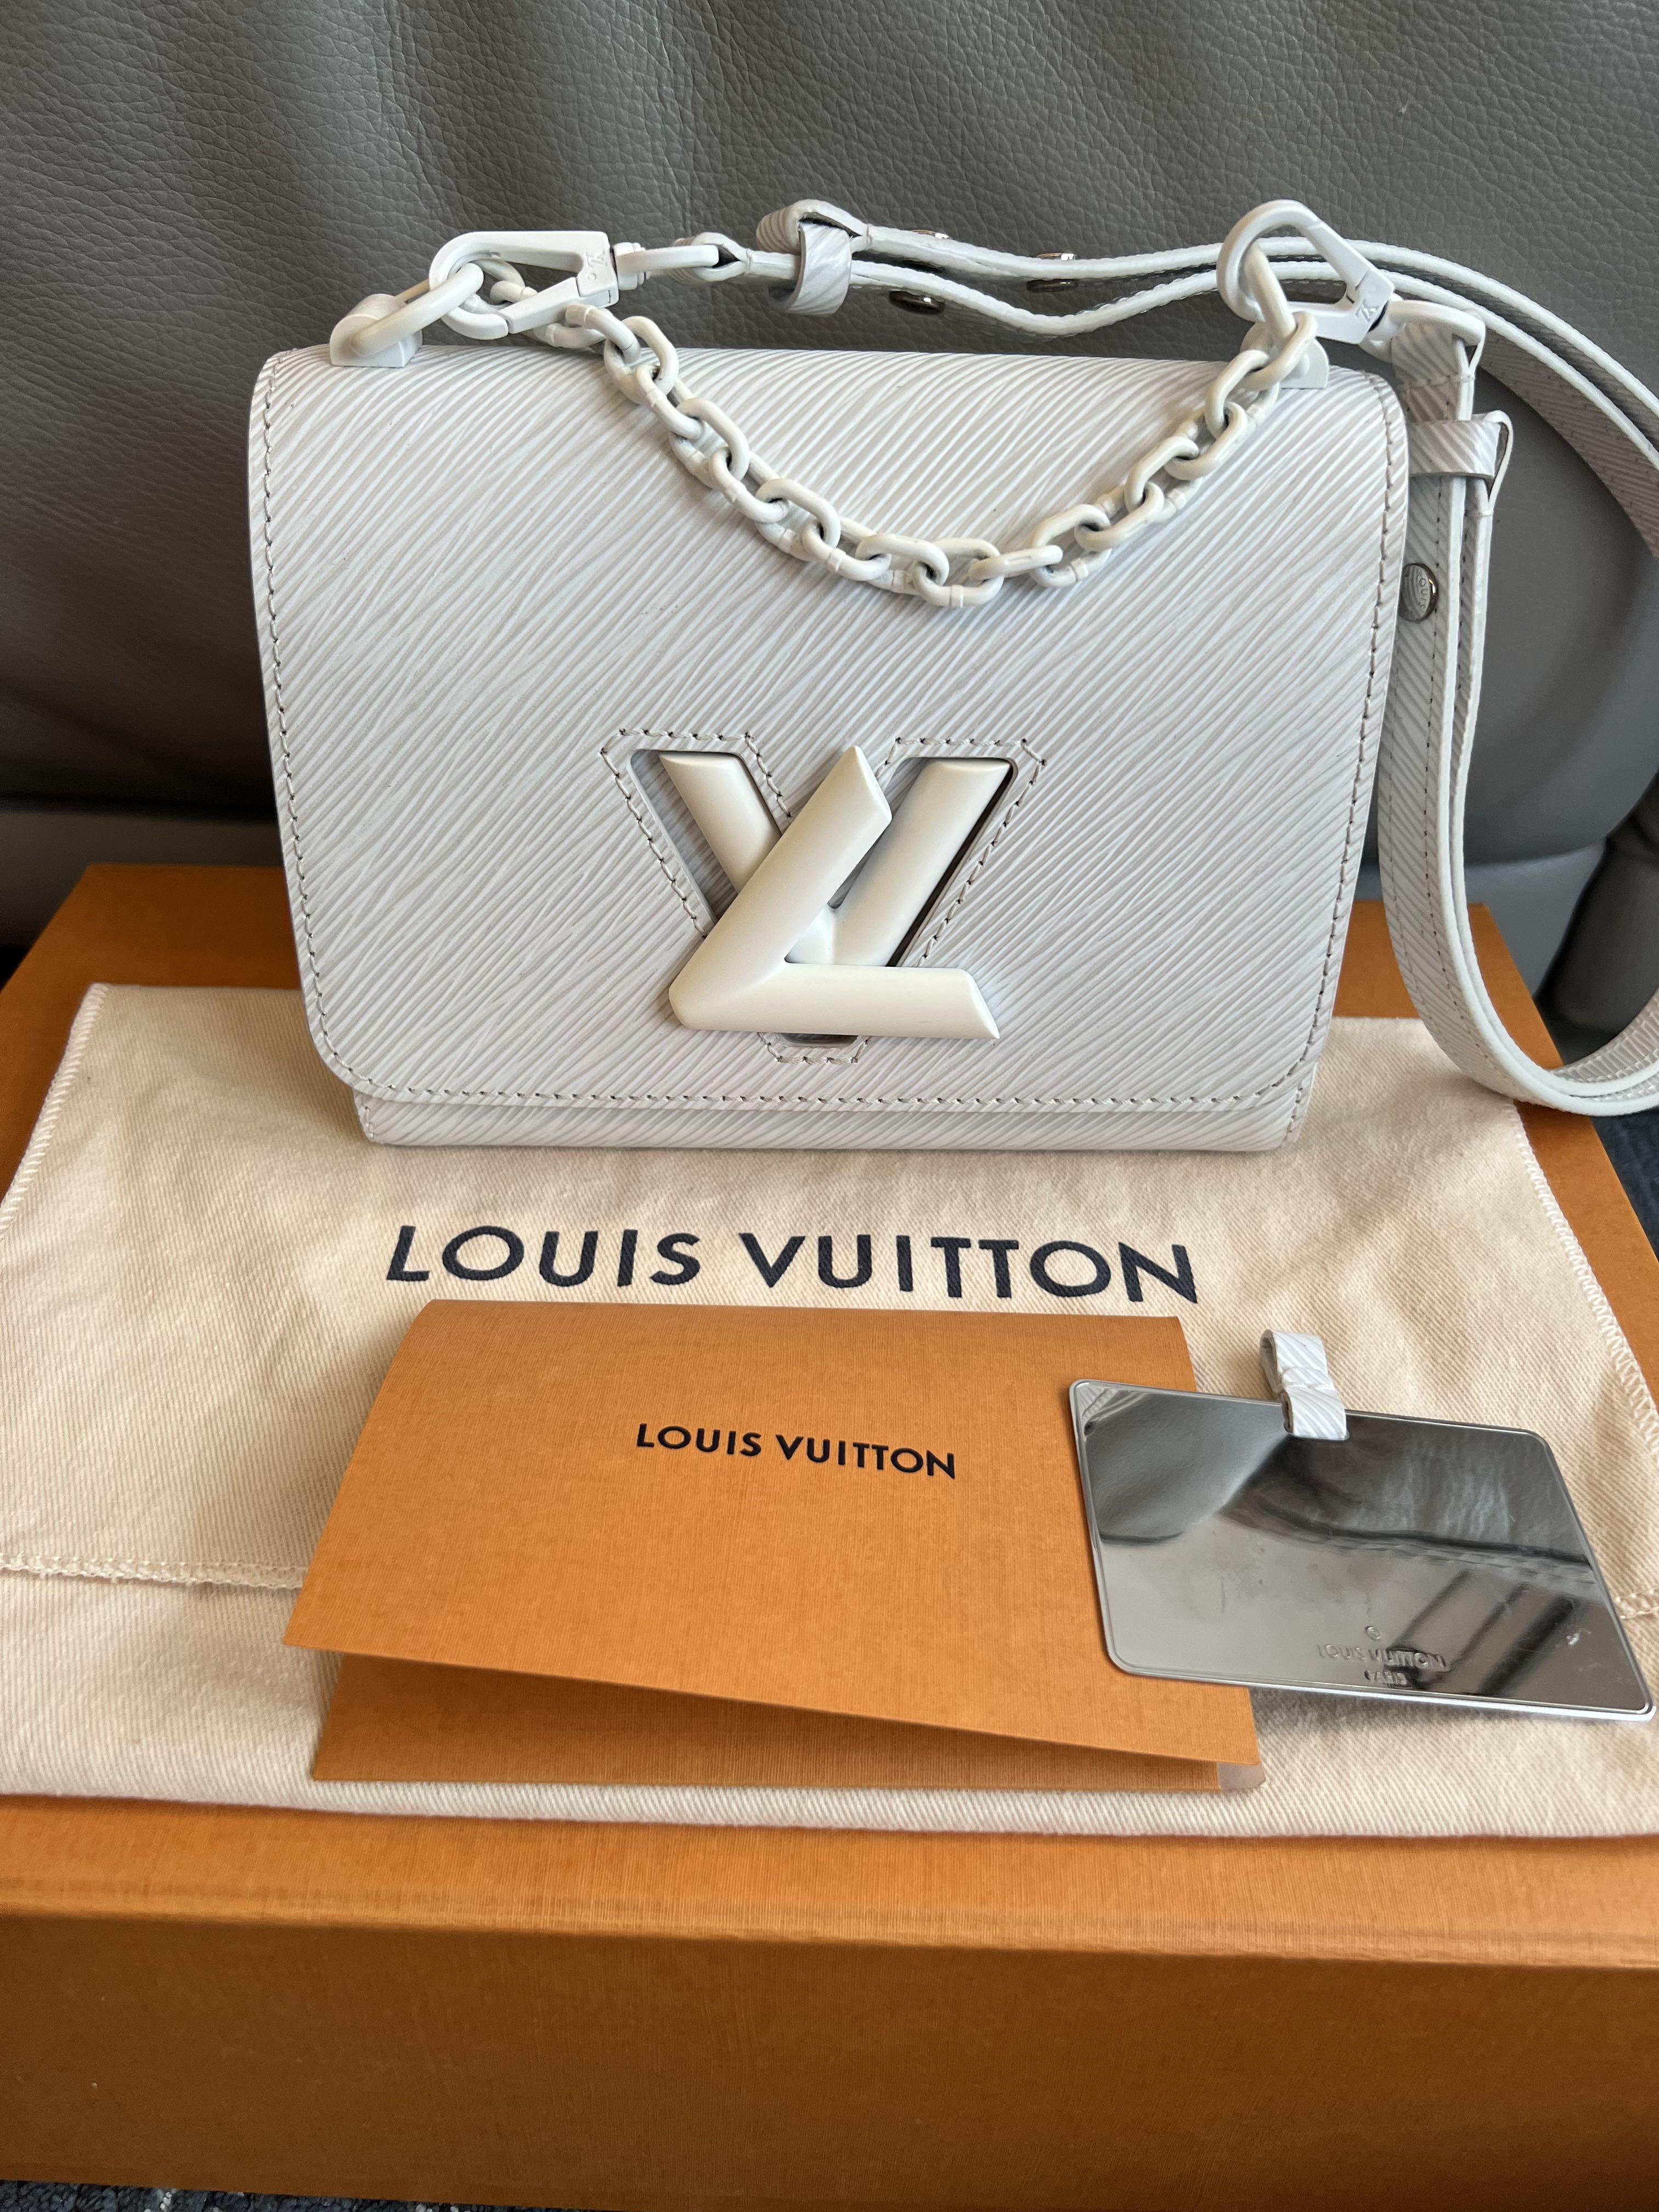 Louis Vuitton Twist PM Immaculate condition Full set $3800 pp